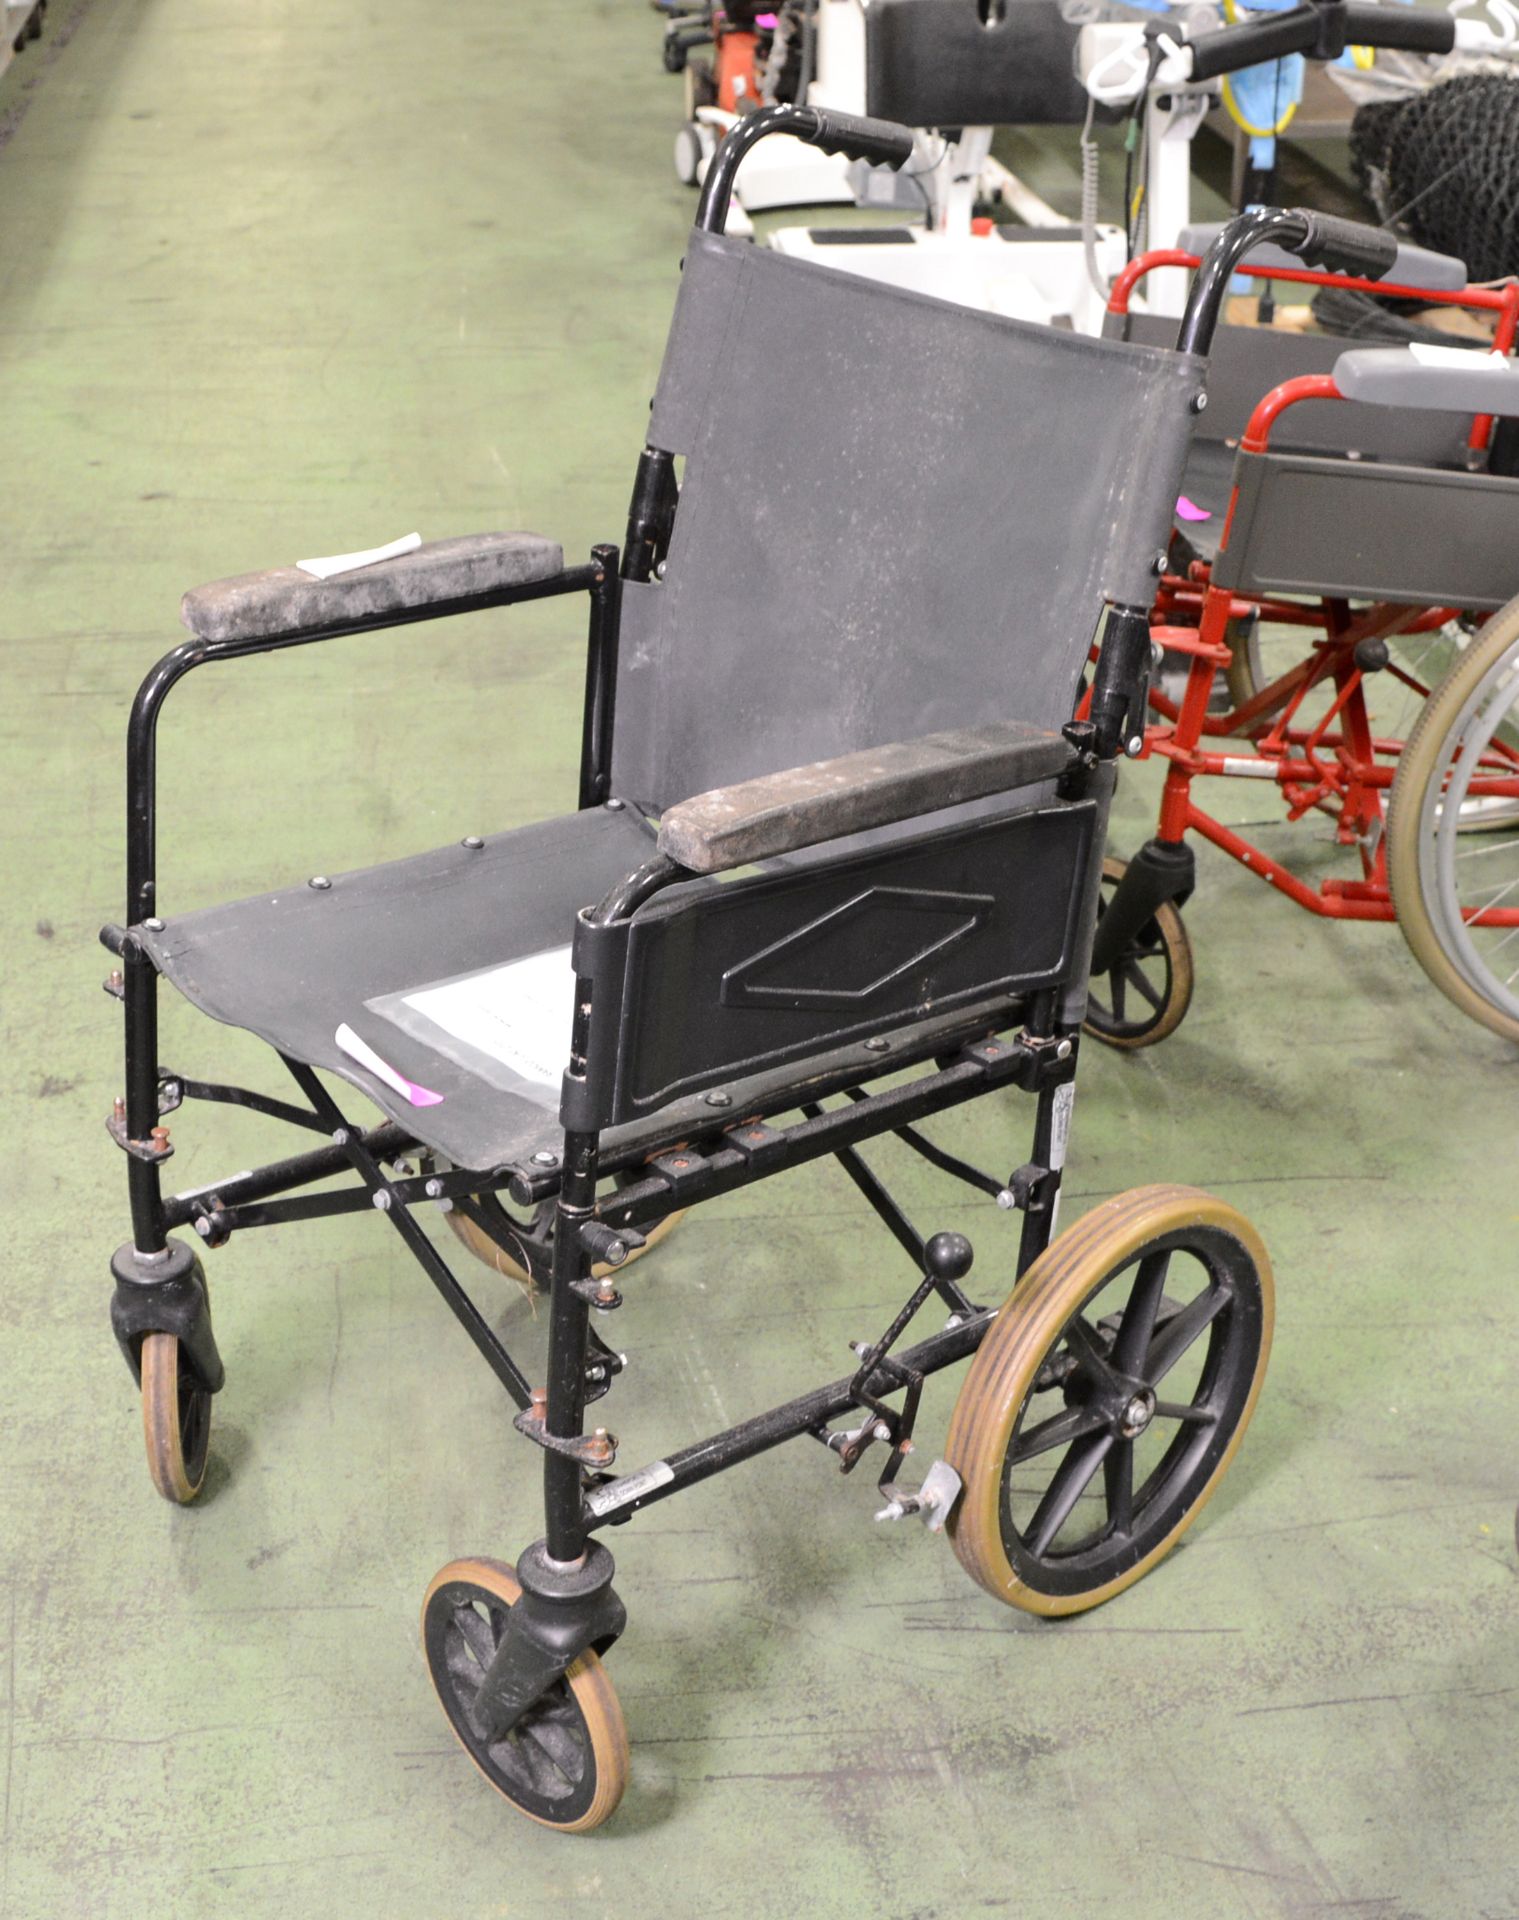 Folding Wheelchair - No footrests.